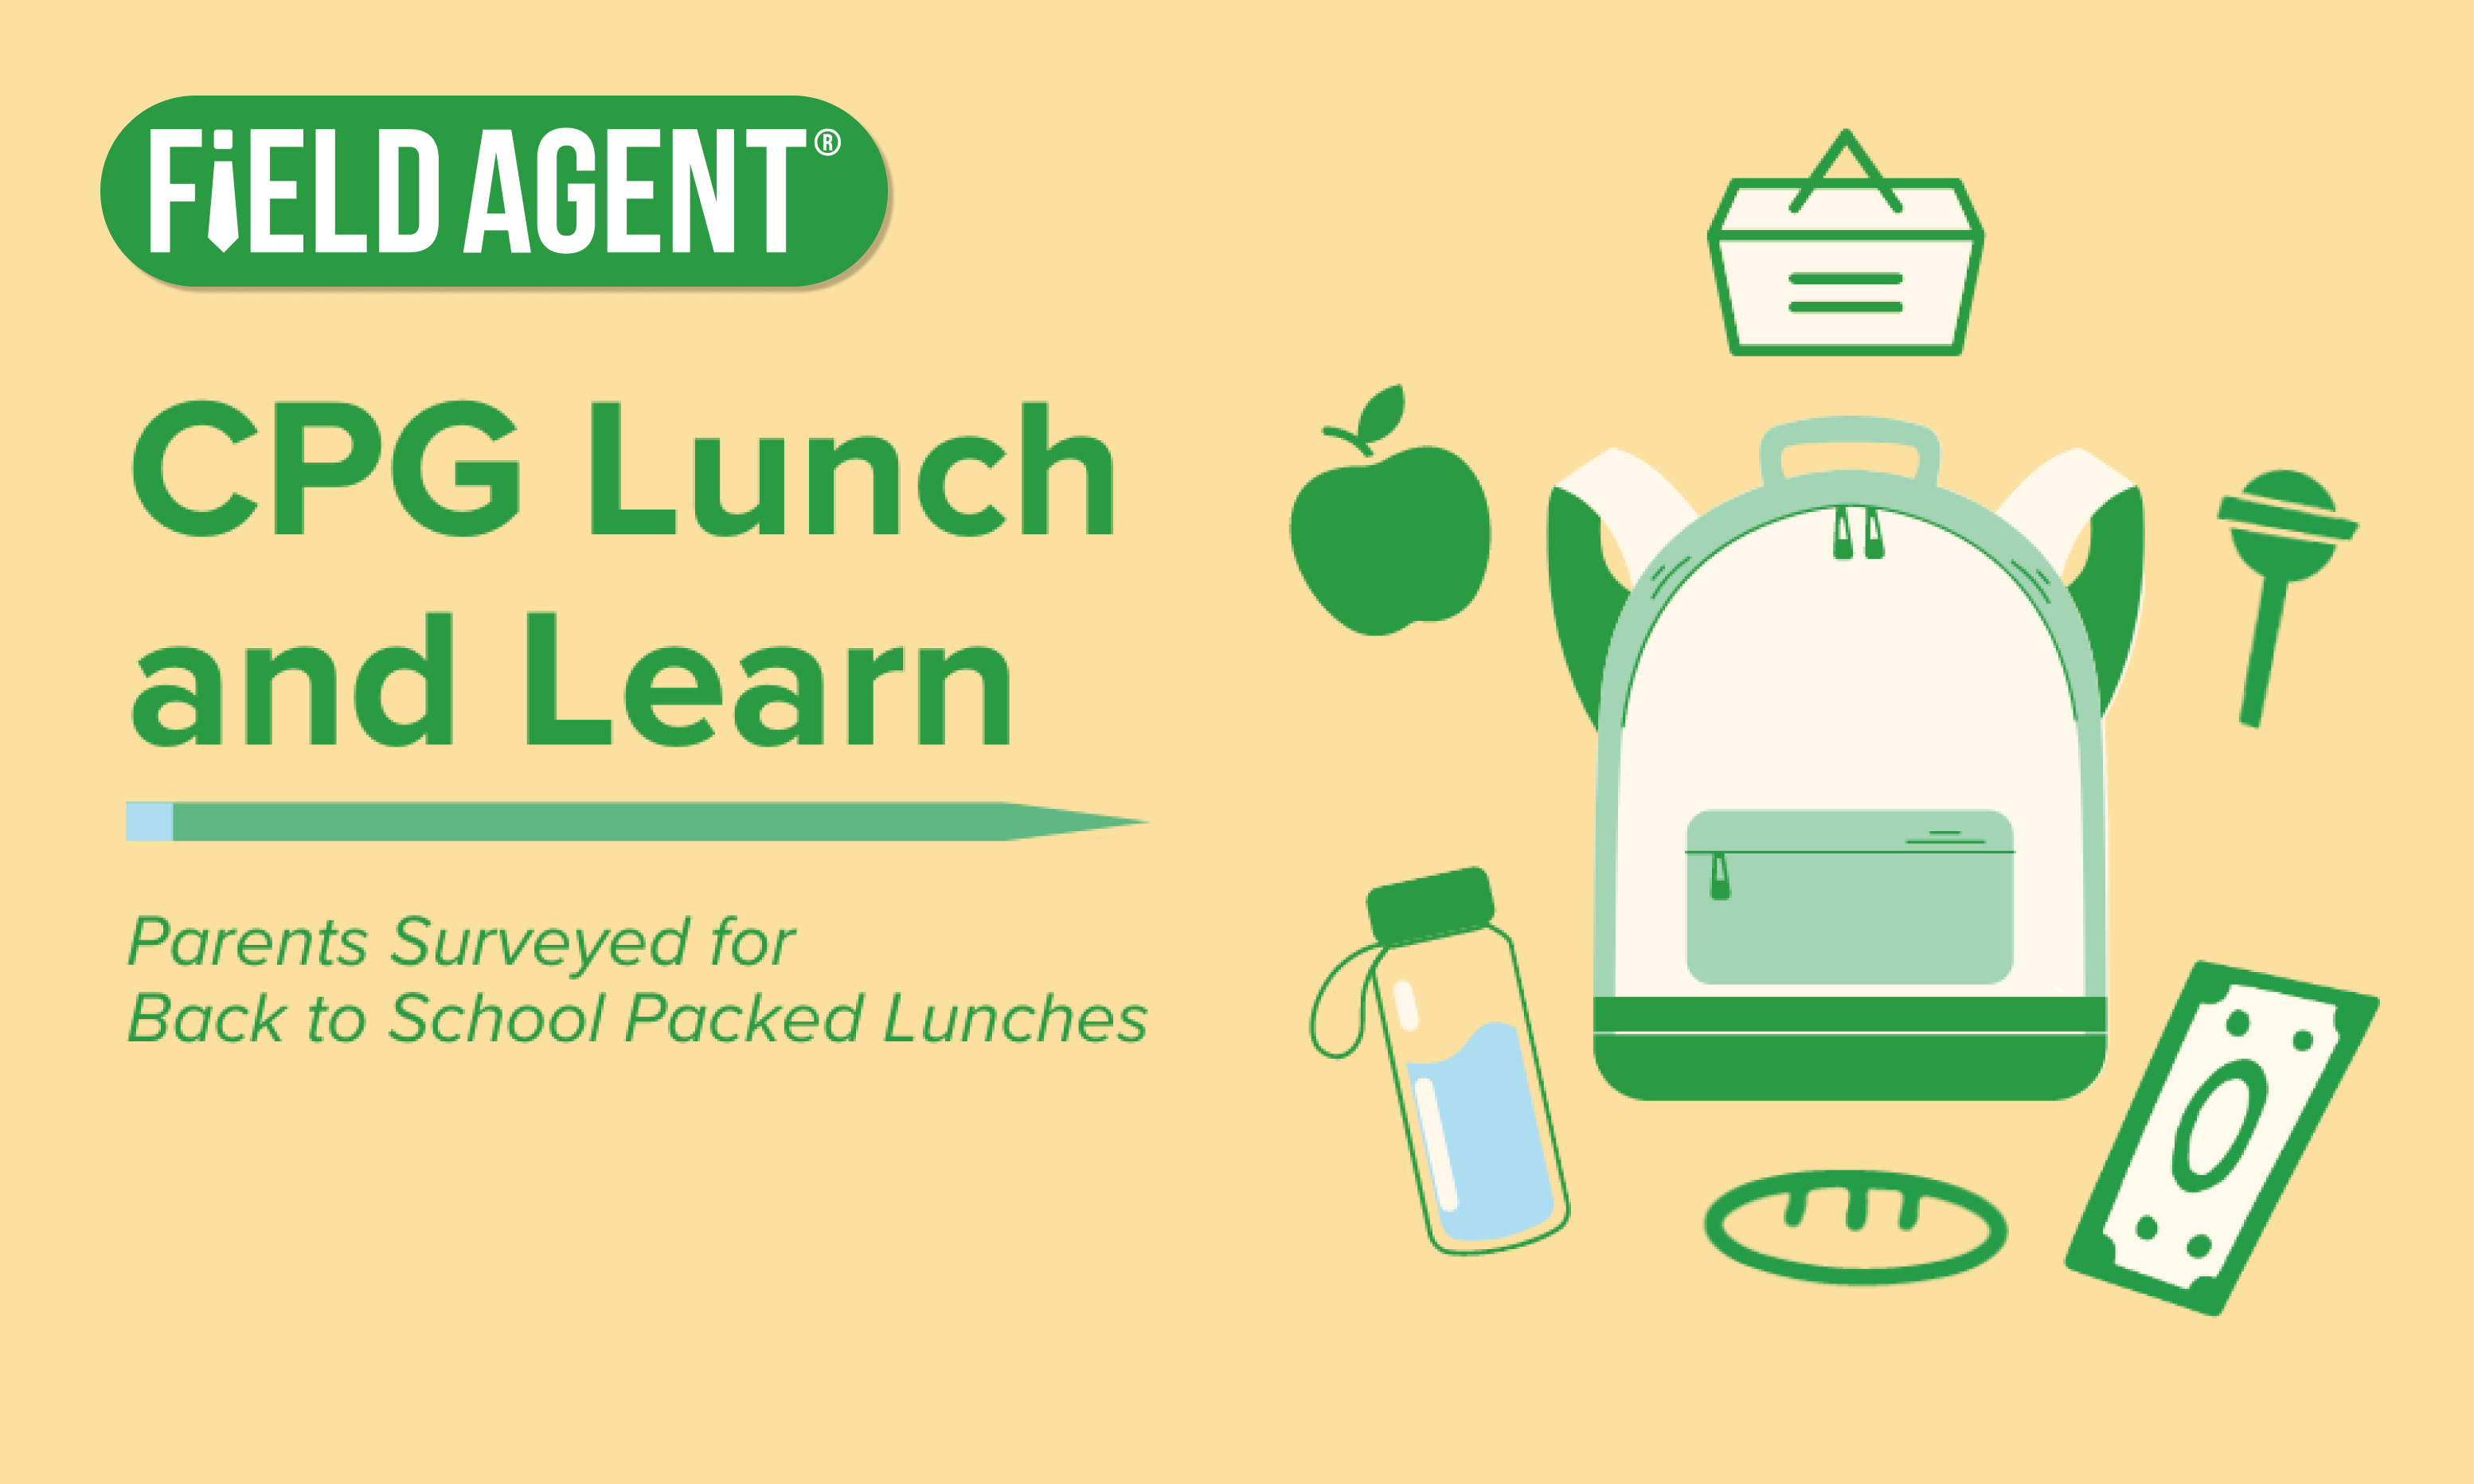 CPG Lunch and Learn: Parents Surveyed for Back to School Packed Lunches